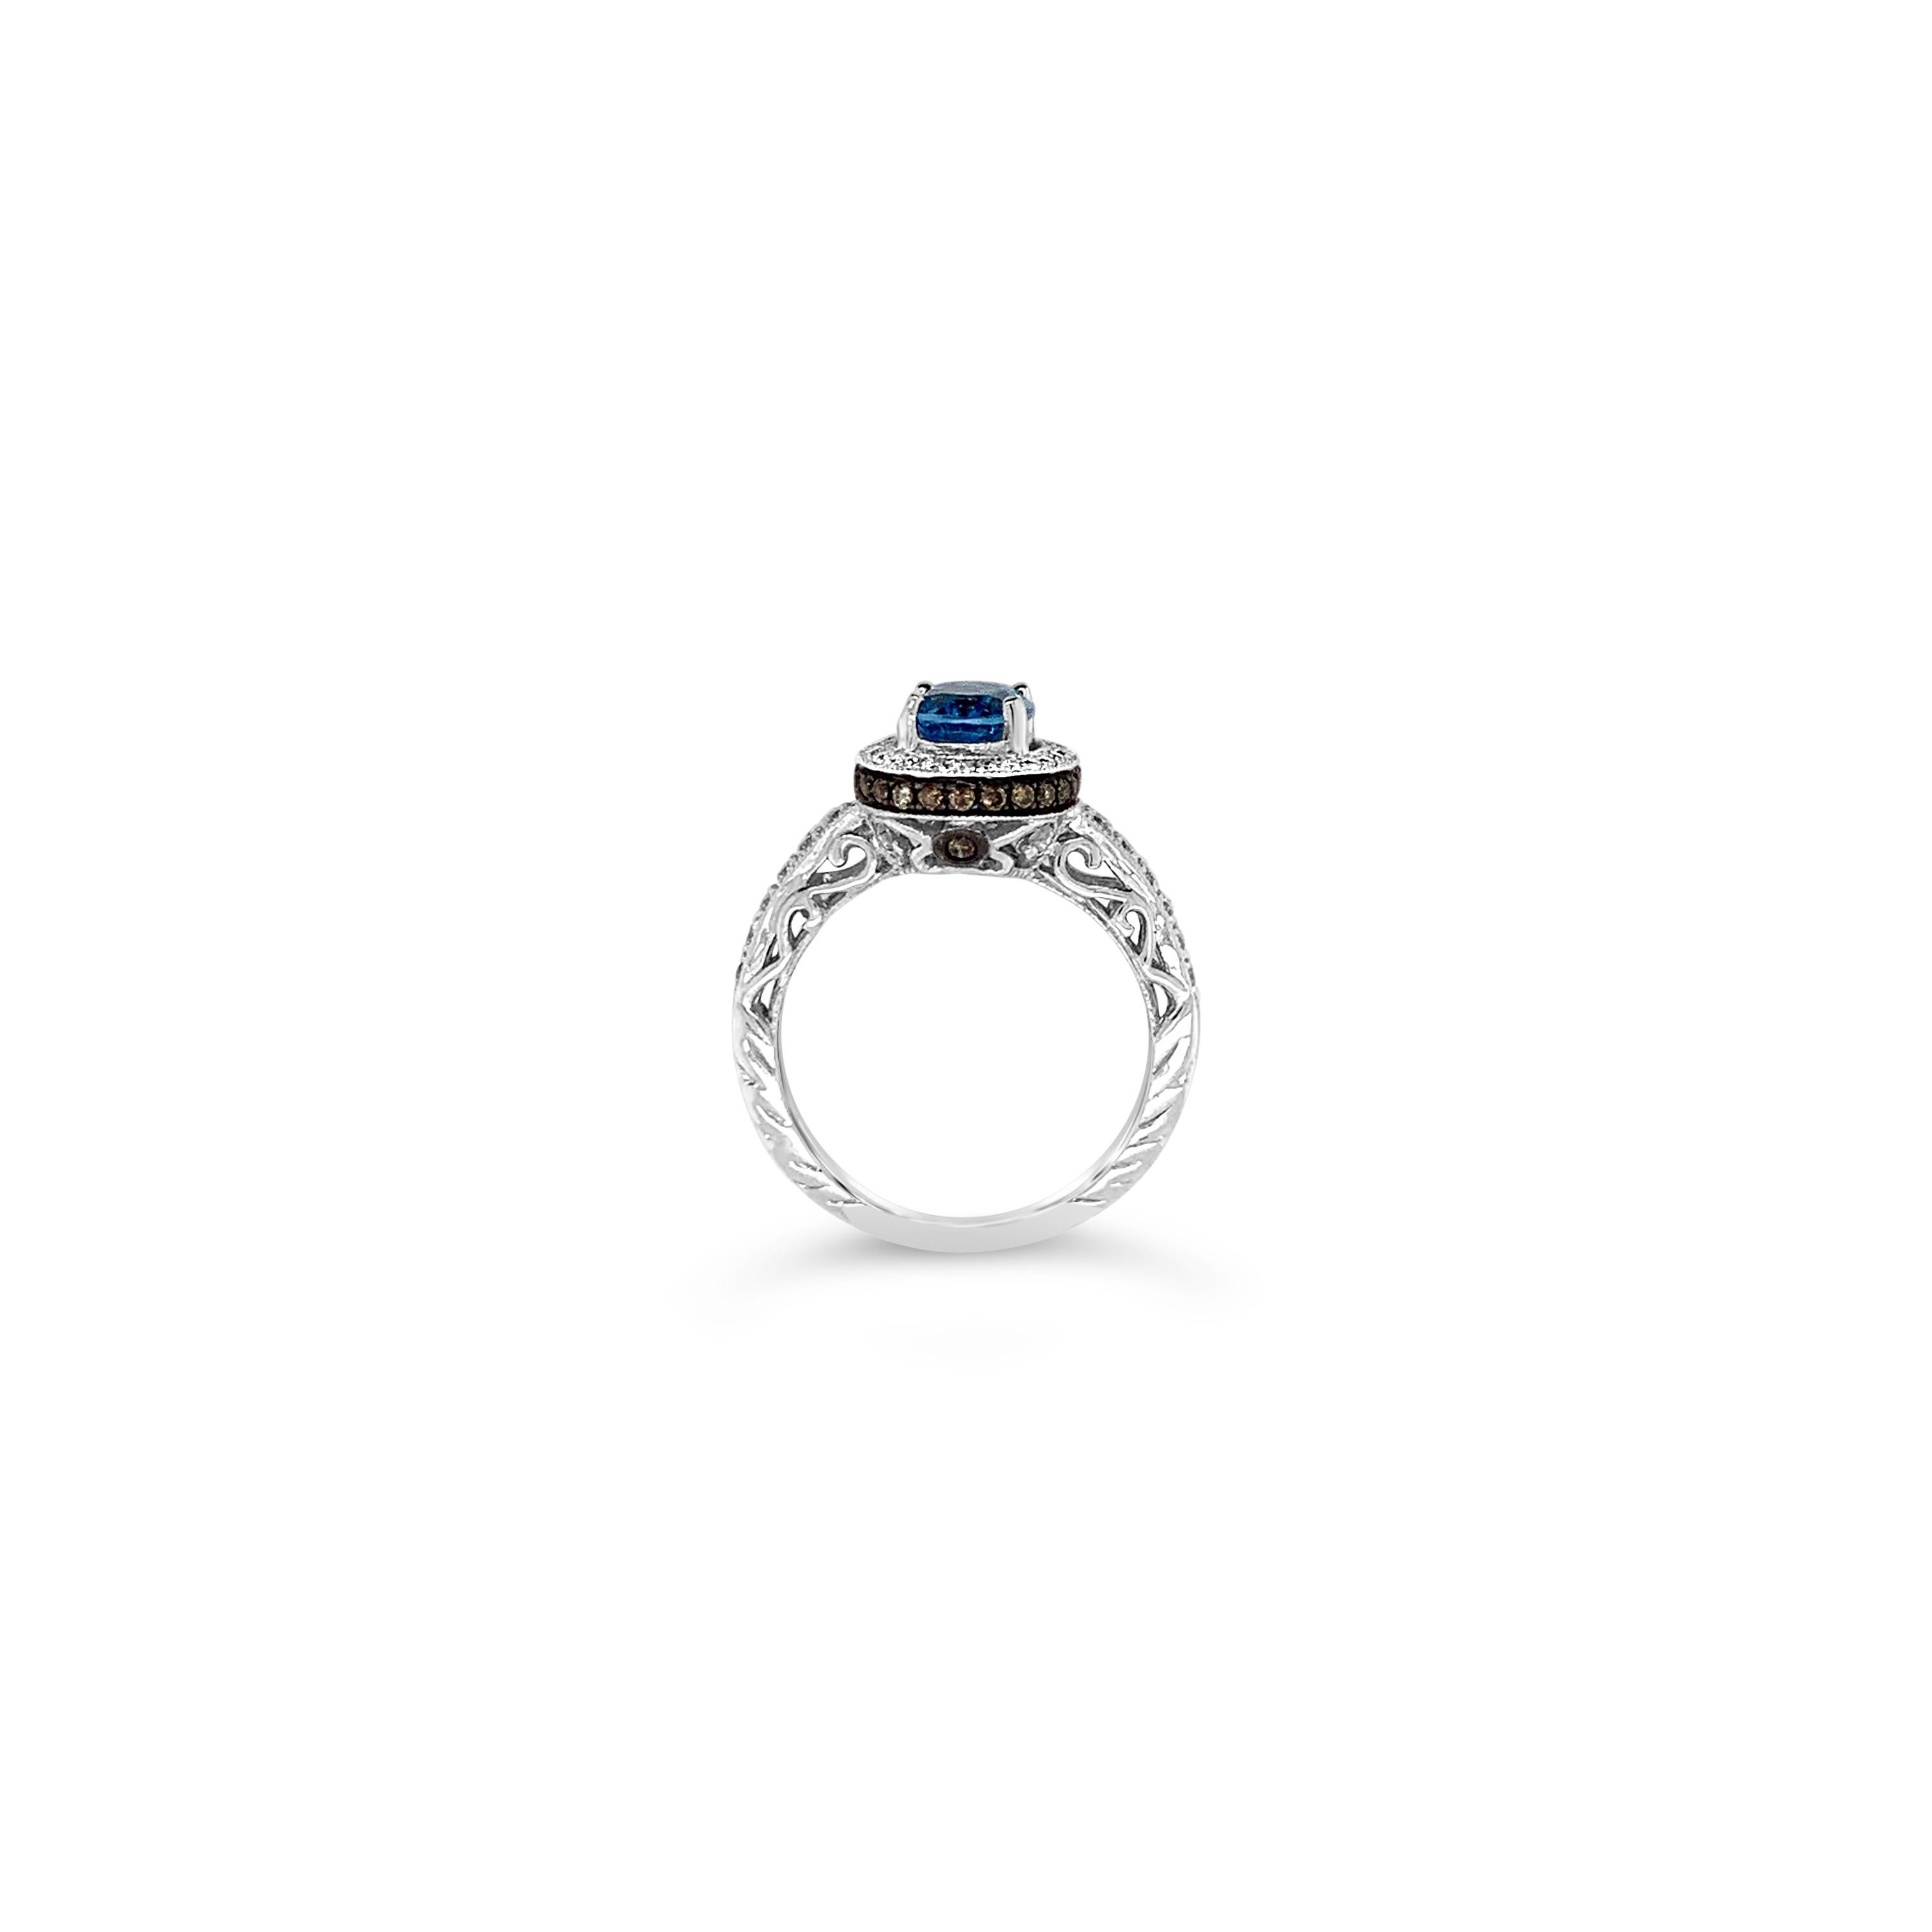 Le Vian Chocolatier® Ring featuring 1.35 cts. Blue Topaz, 0.20 cts. Chocolate Diamonds® , 0.25 cts. Vanilla Diamonds®  set in 14K Vanilla Gold®
Ring size 6.75
Please feel free to reach out with any questions! Item comes with a Le Vian® jewelry box